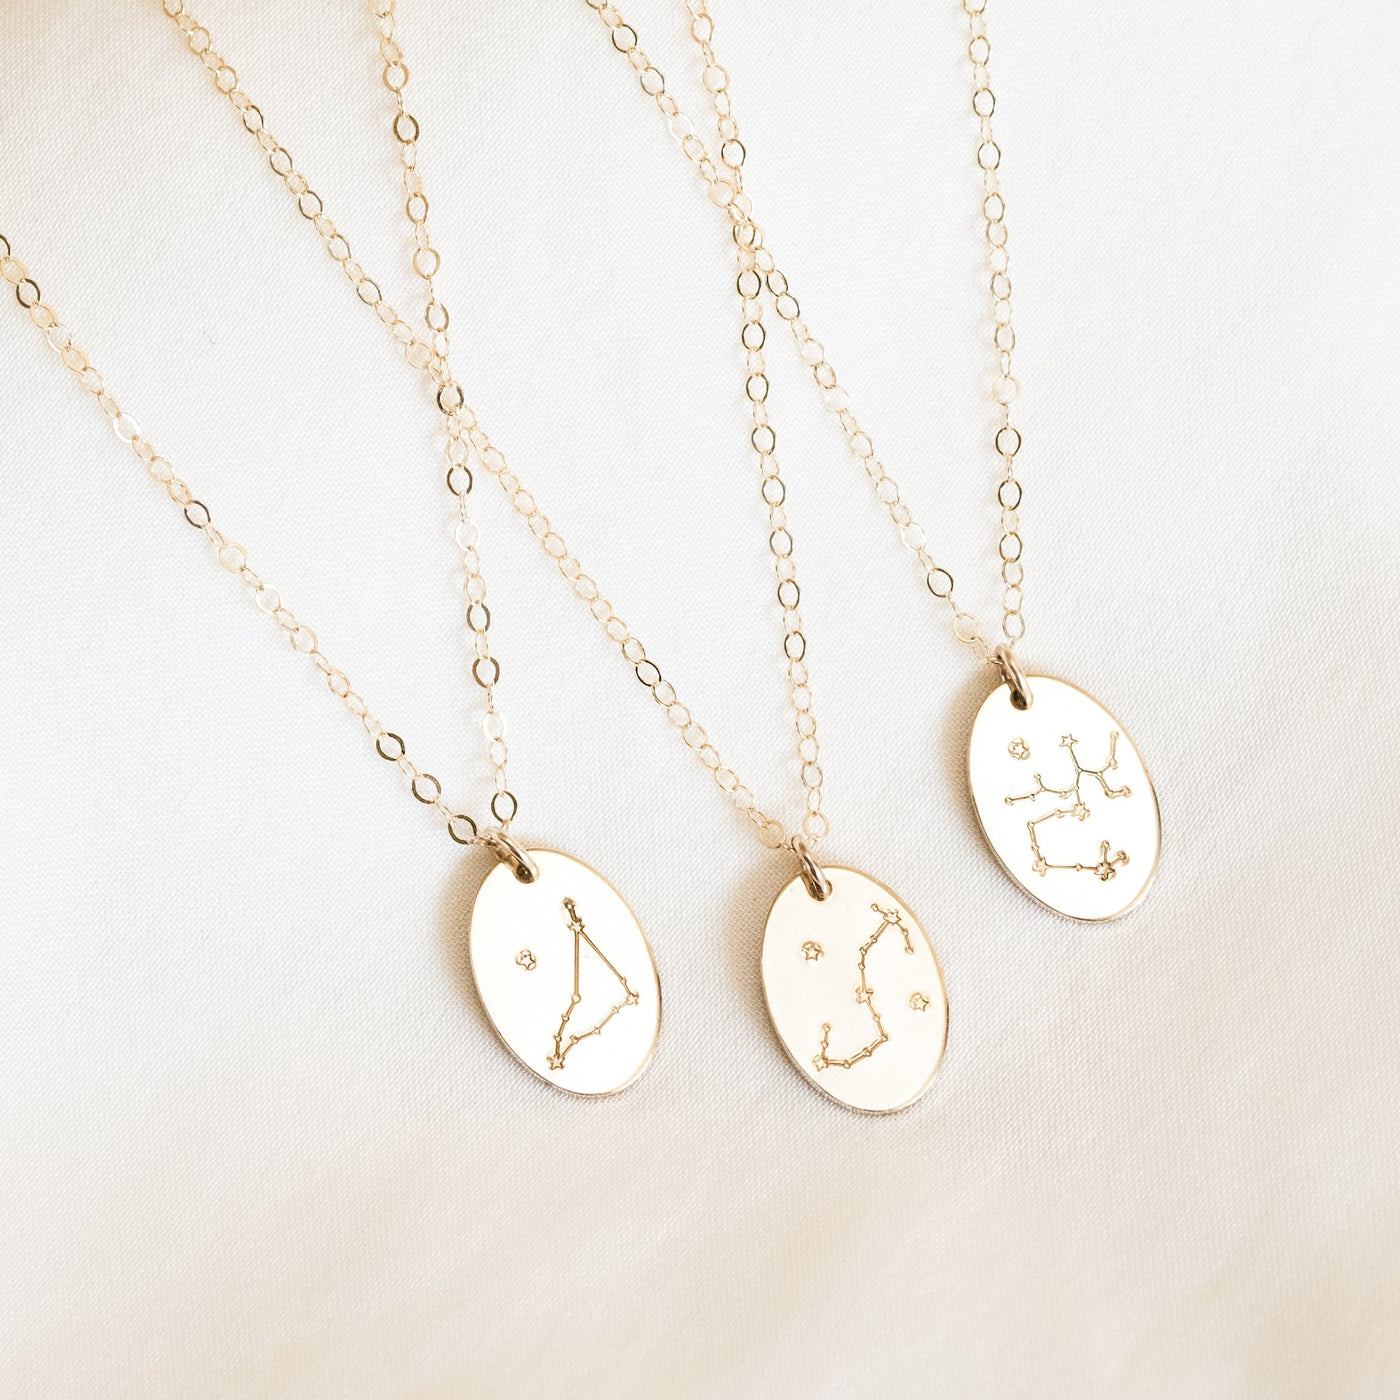 Constellation Necklace | Simple & Dainty Jewelry